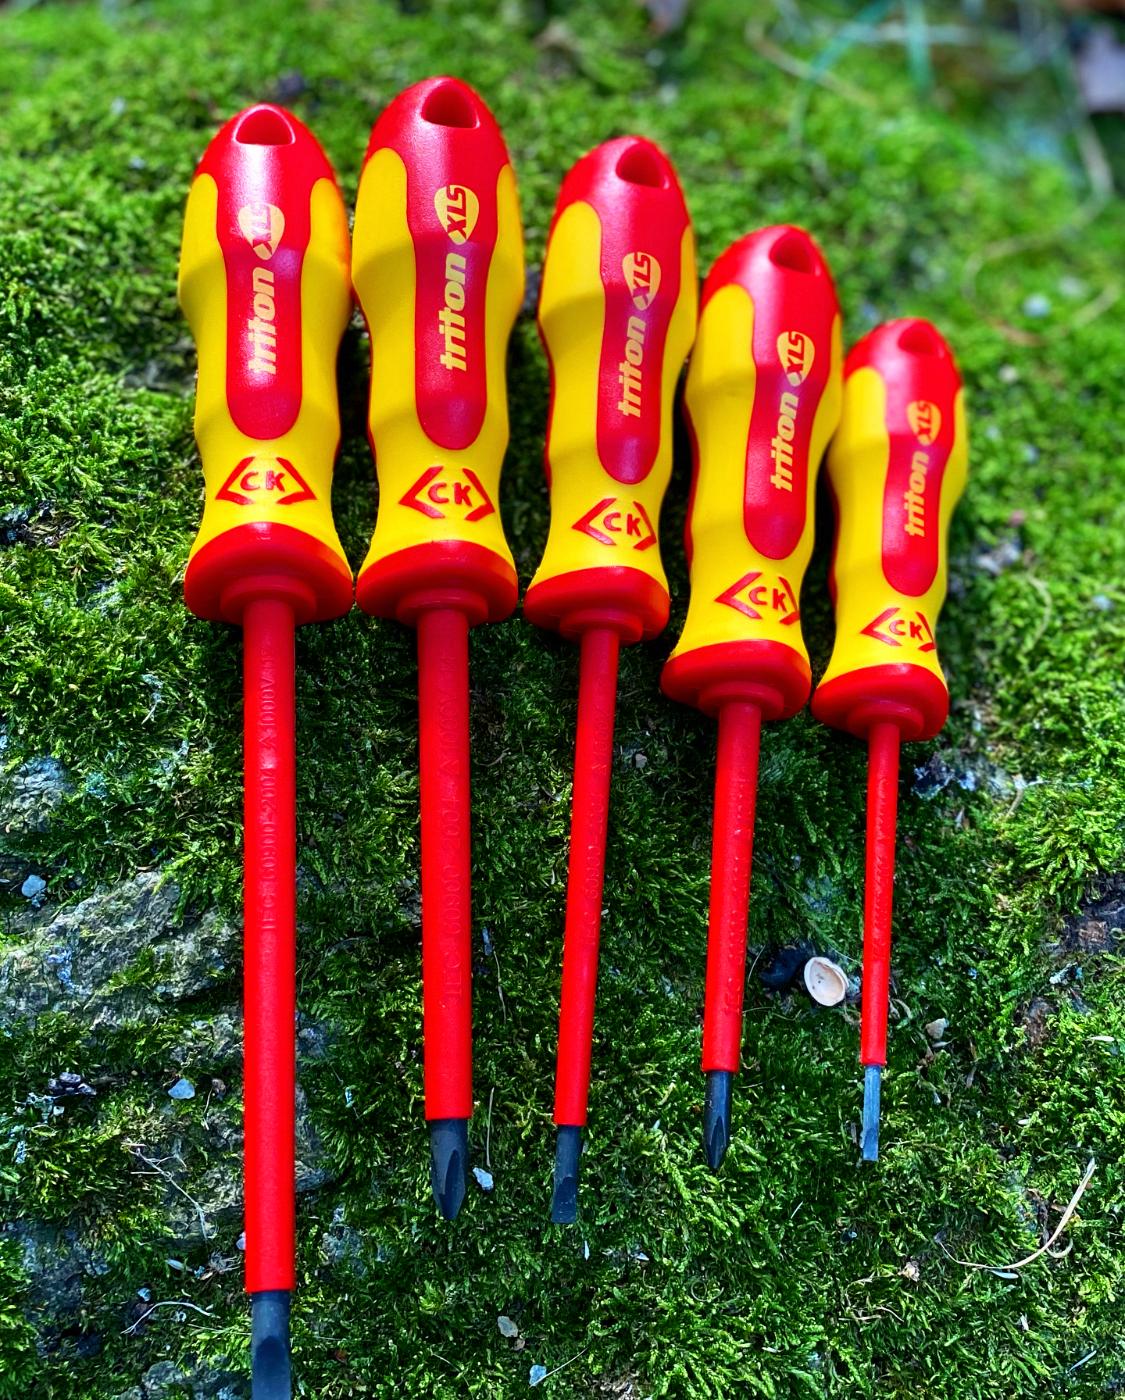 High quality screwdrivers at unbeatable prices.